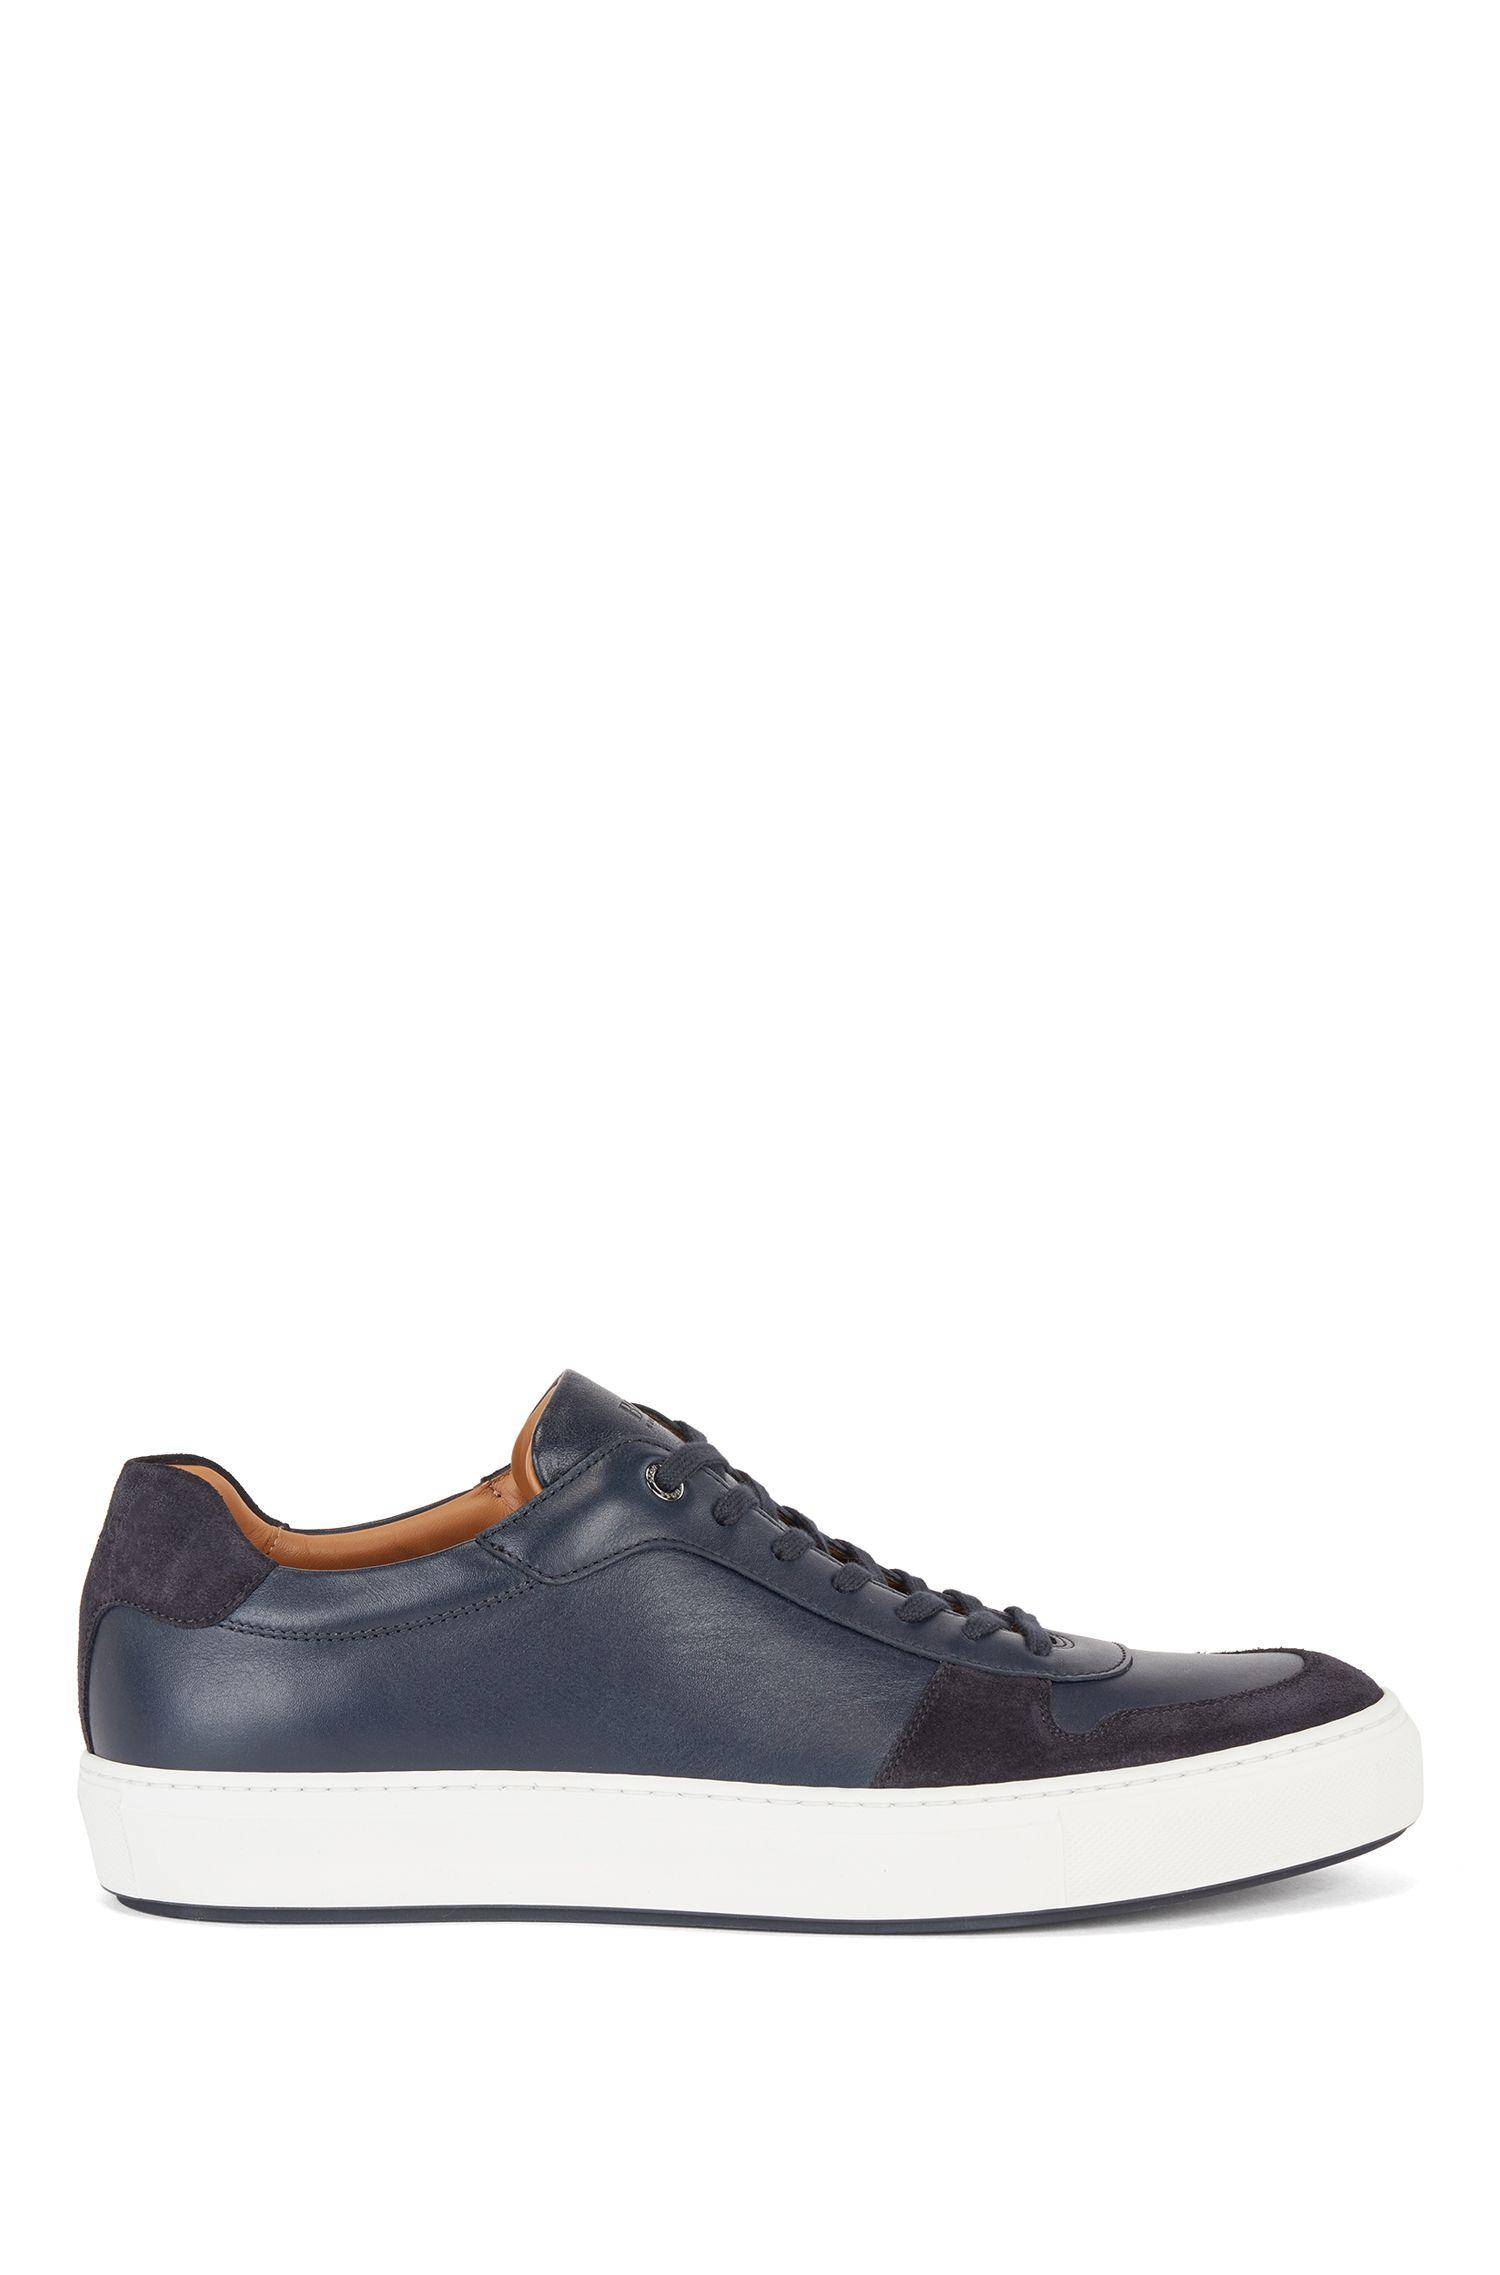 BOSS by Hugo Boss Rubber Cupsole Trainers In Nappa Leather And Suede in ...